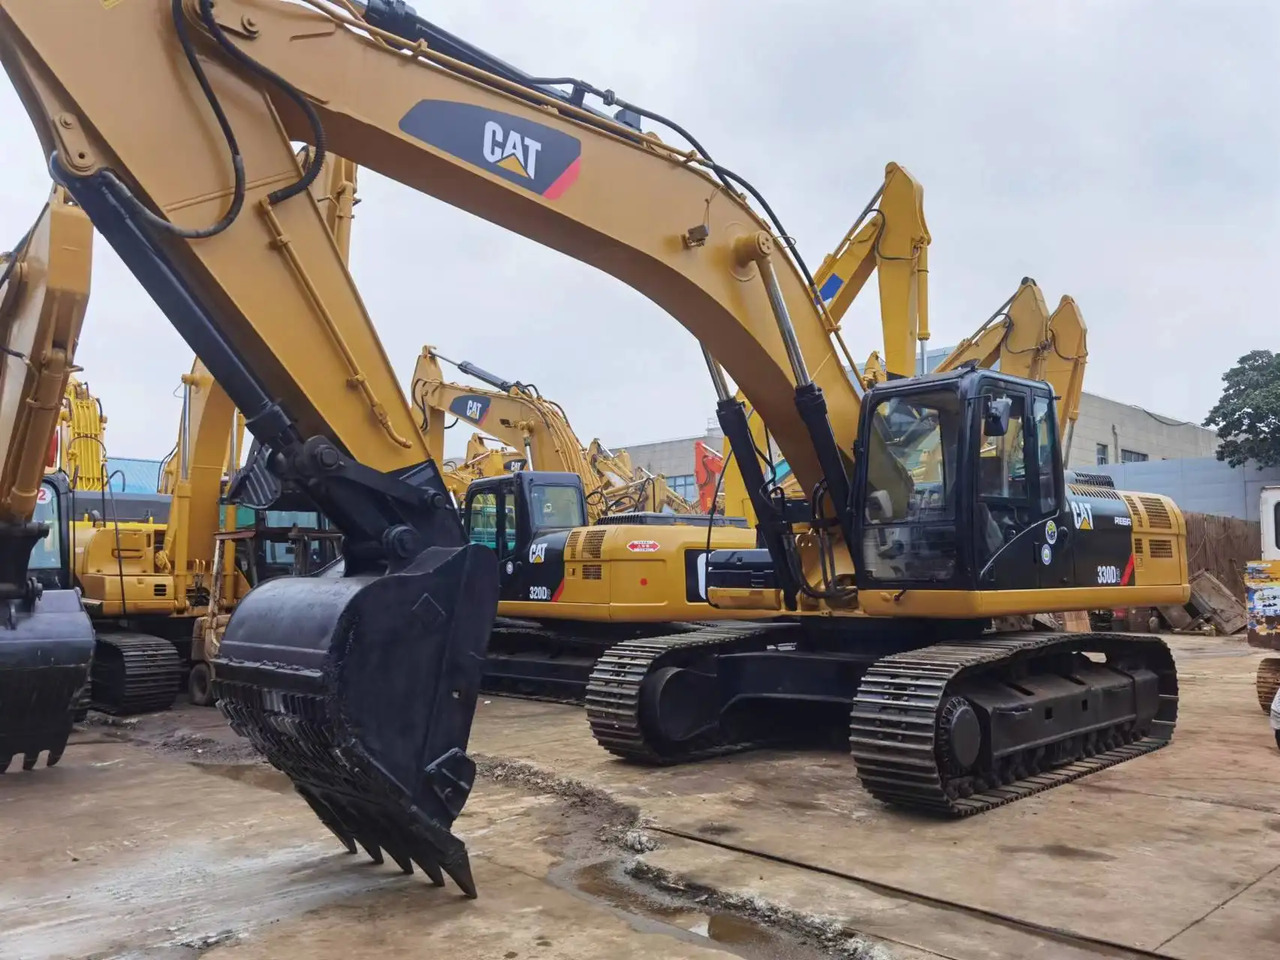 Beltegraver Hot sale Used CAT 330DL Excavator CAT 330DL made in Japan in good Working Condition in stock on: bilde 4